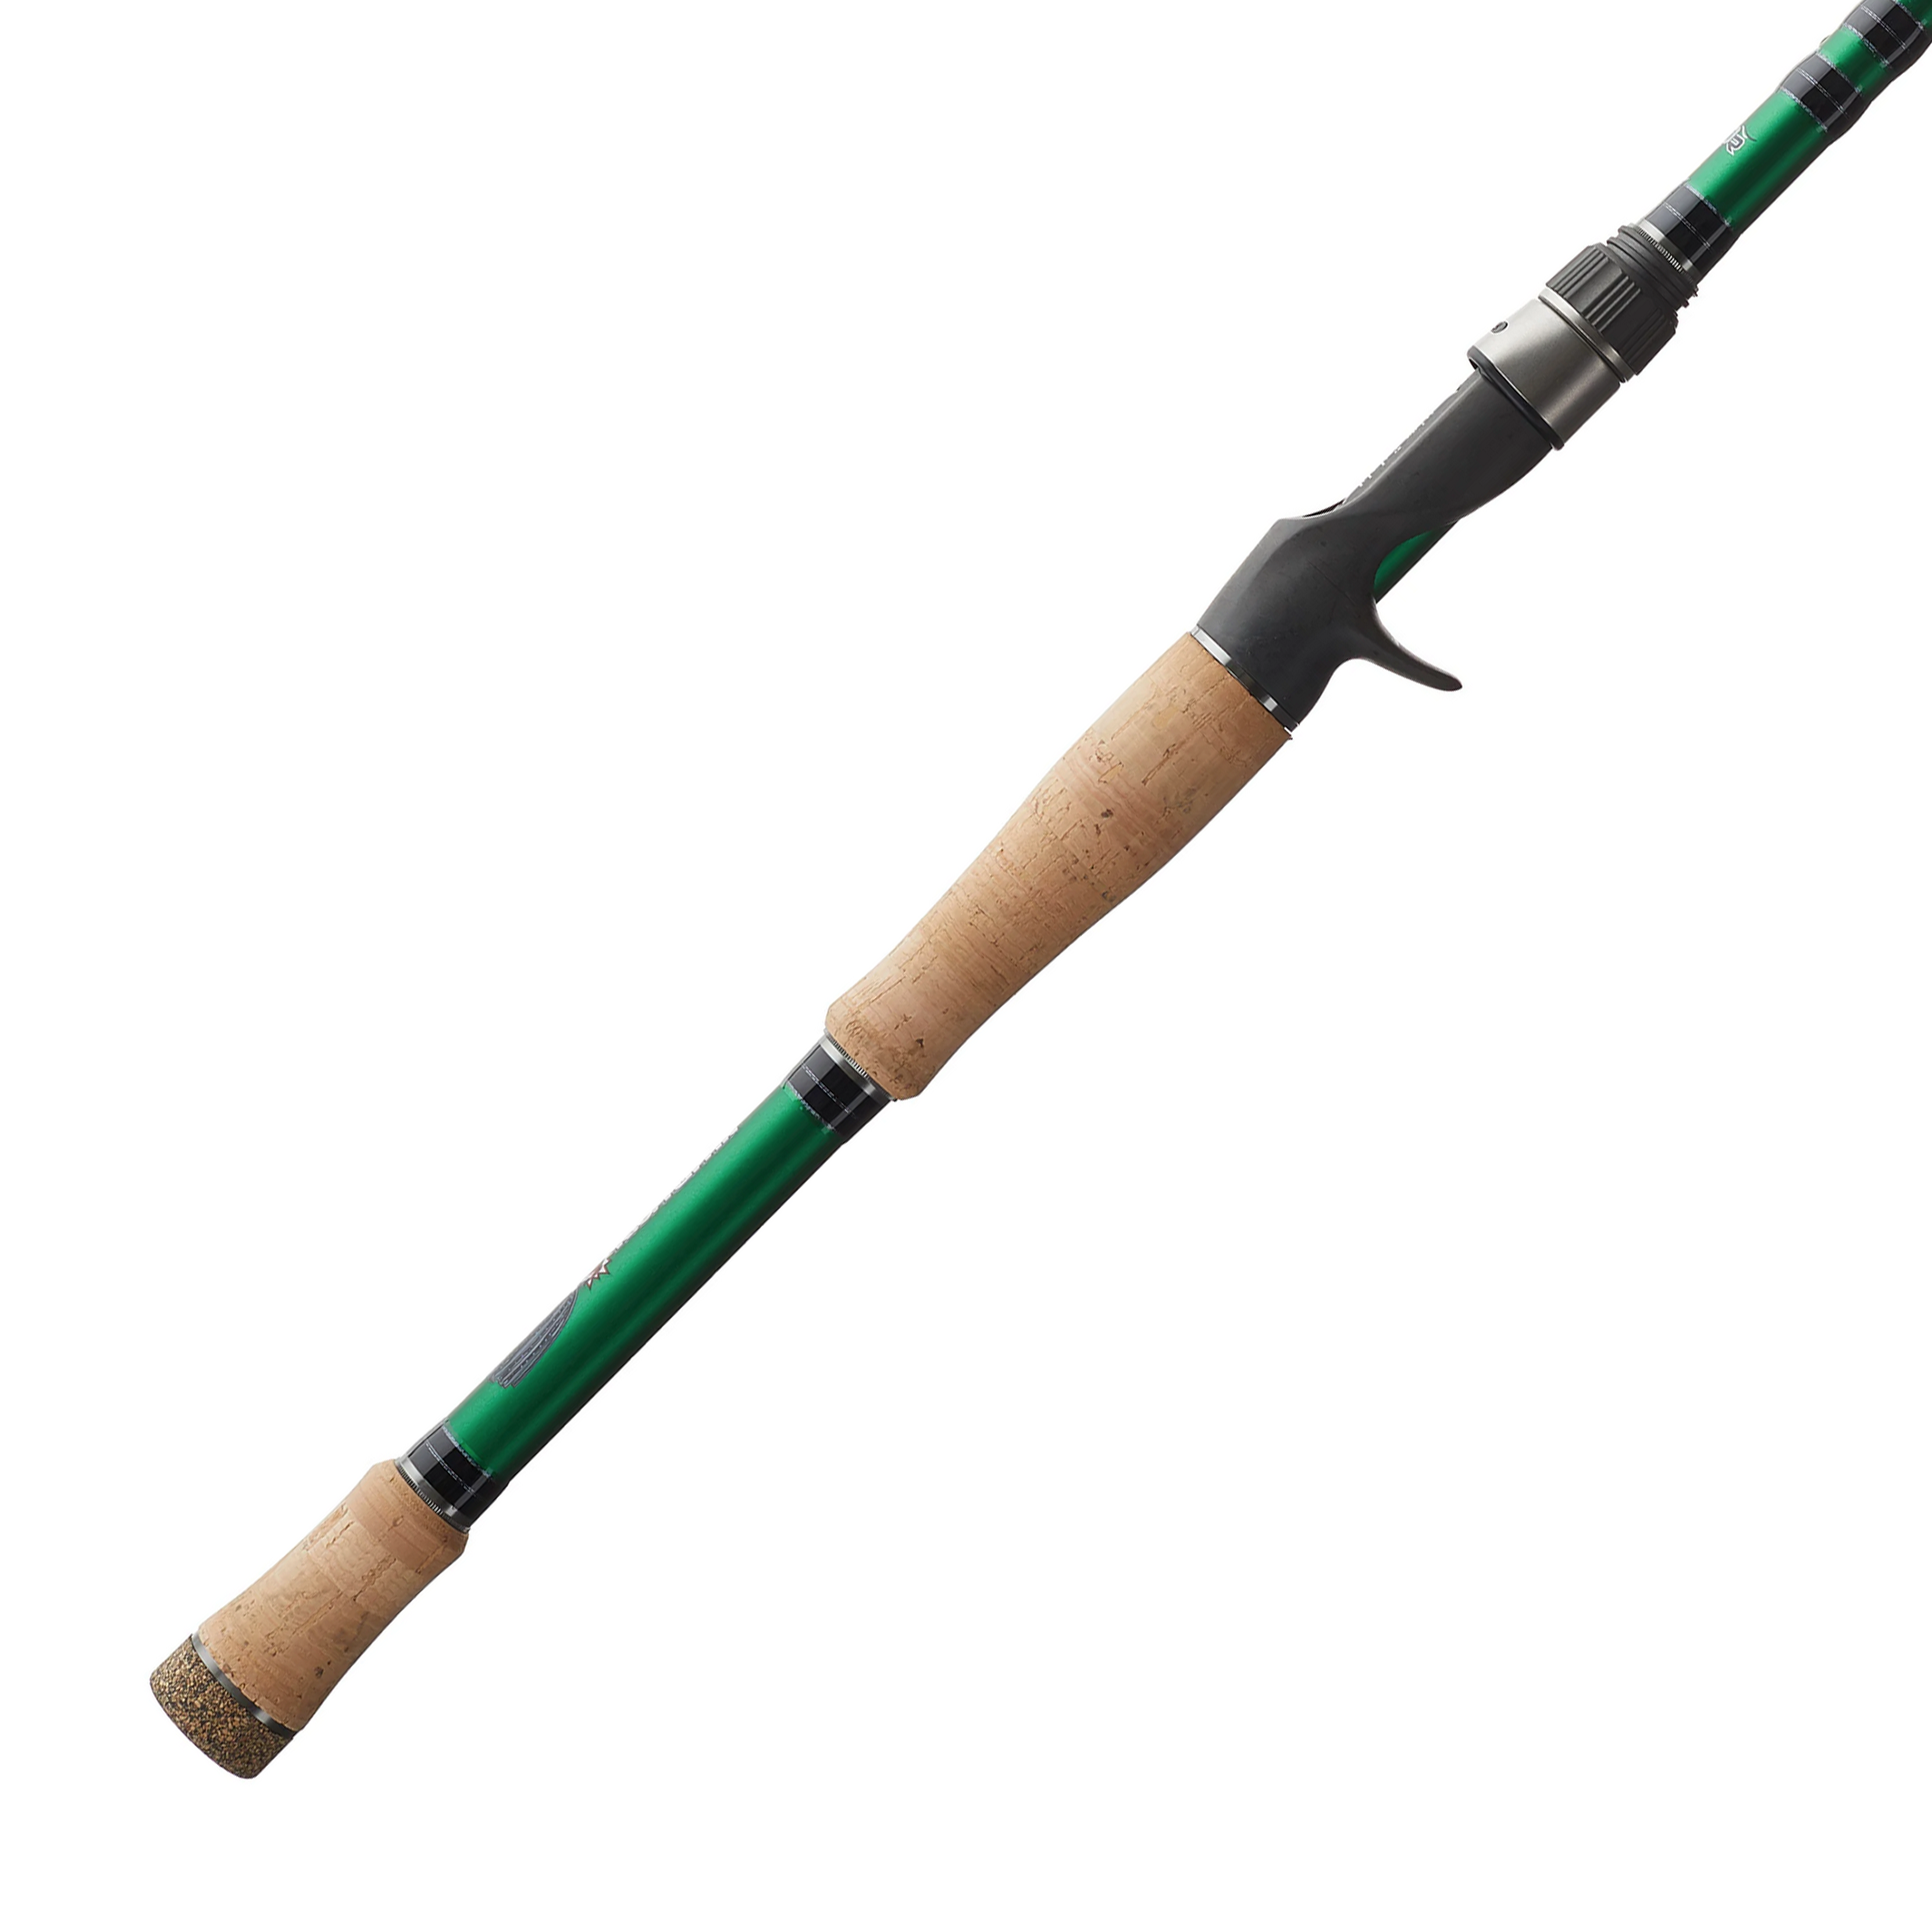 https://summerlandoutdoors.com/wp-content/uploads/2021/08/Dobyns-Fred-22Boom-Boom22-Roumbanis-Series-Casting-Rods.png